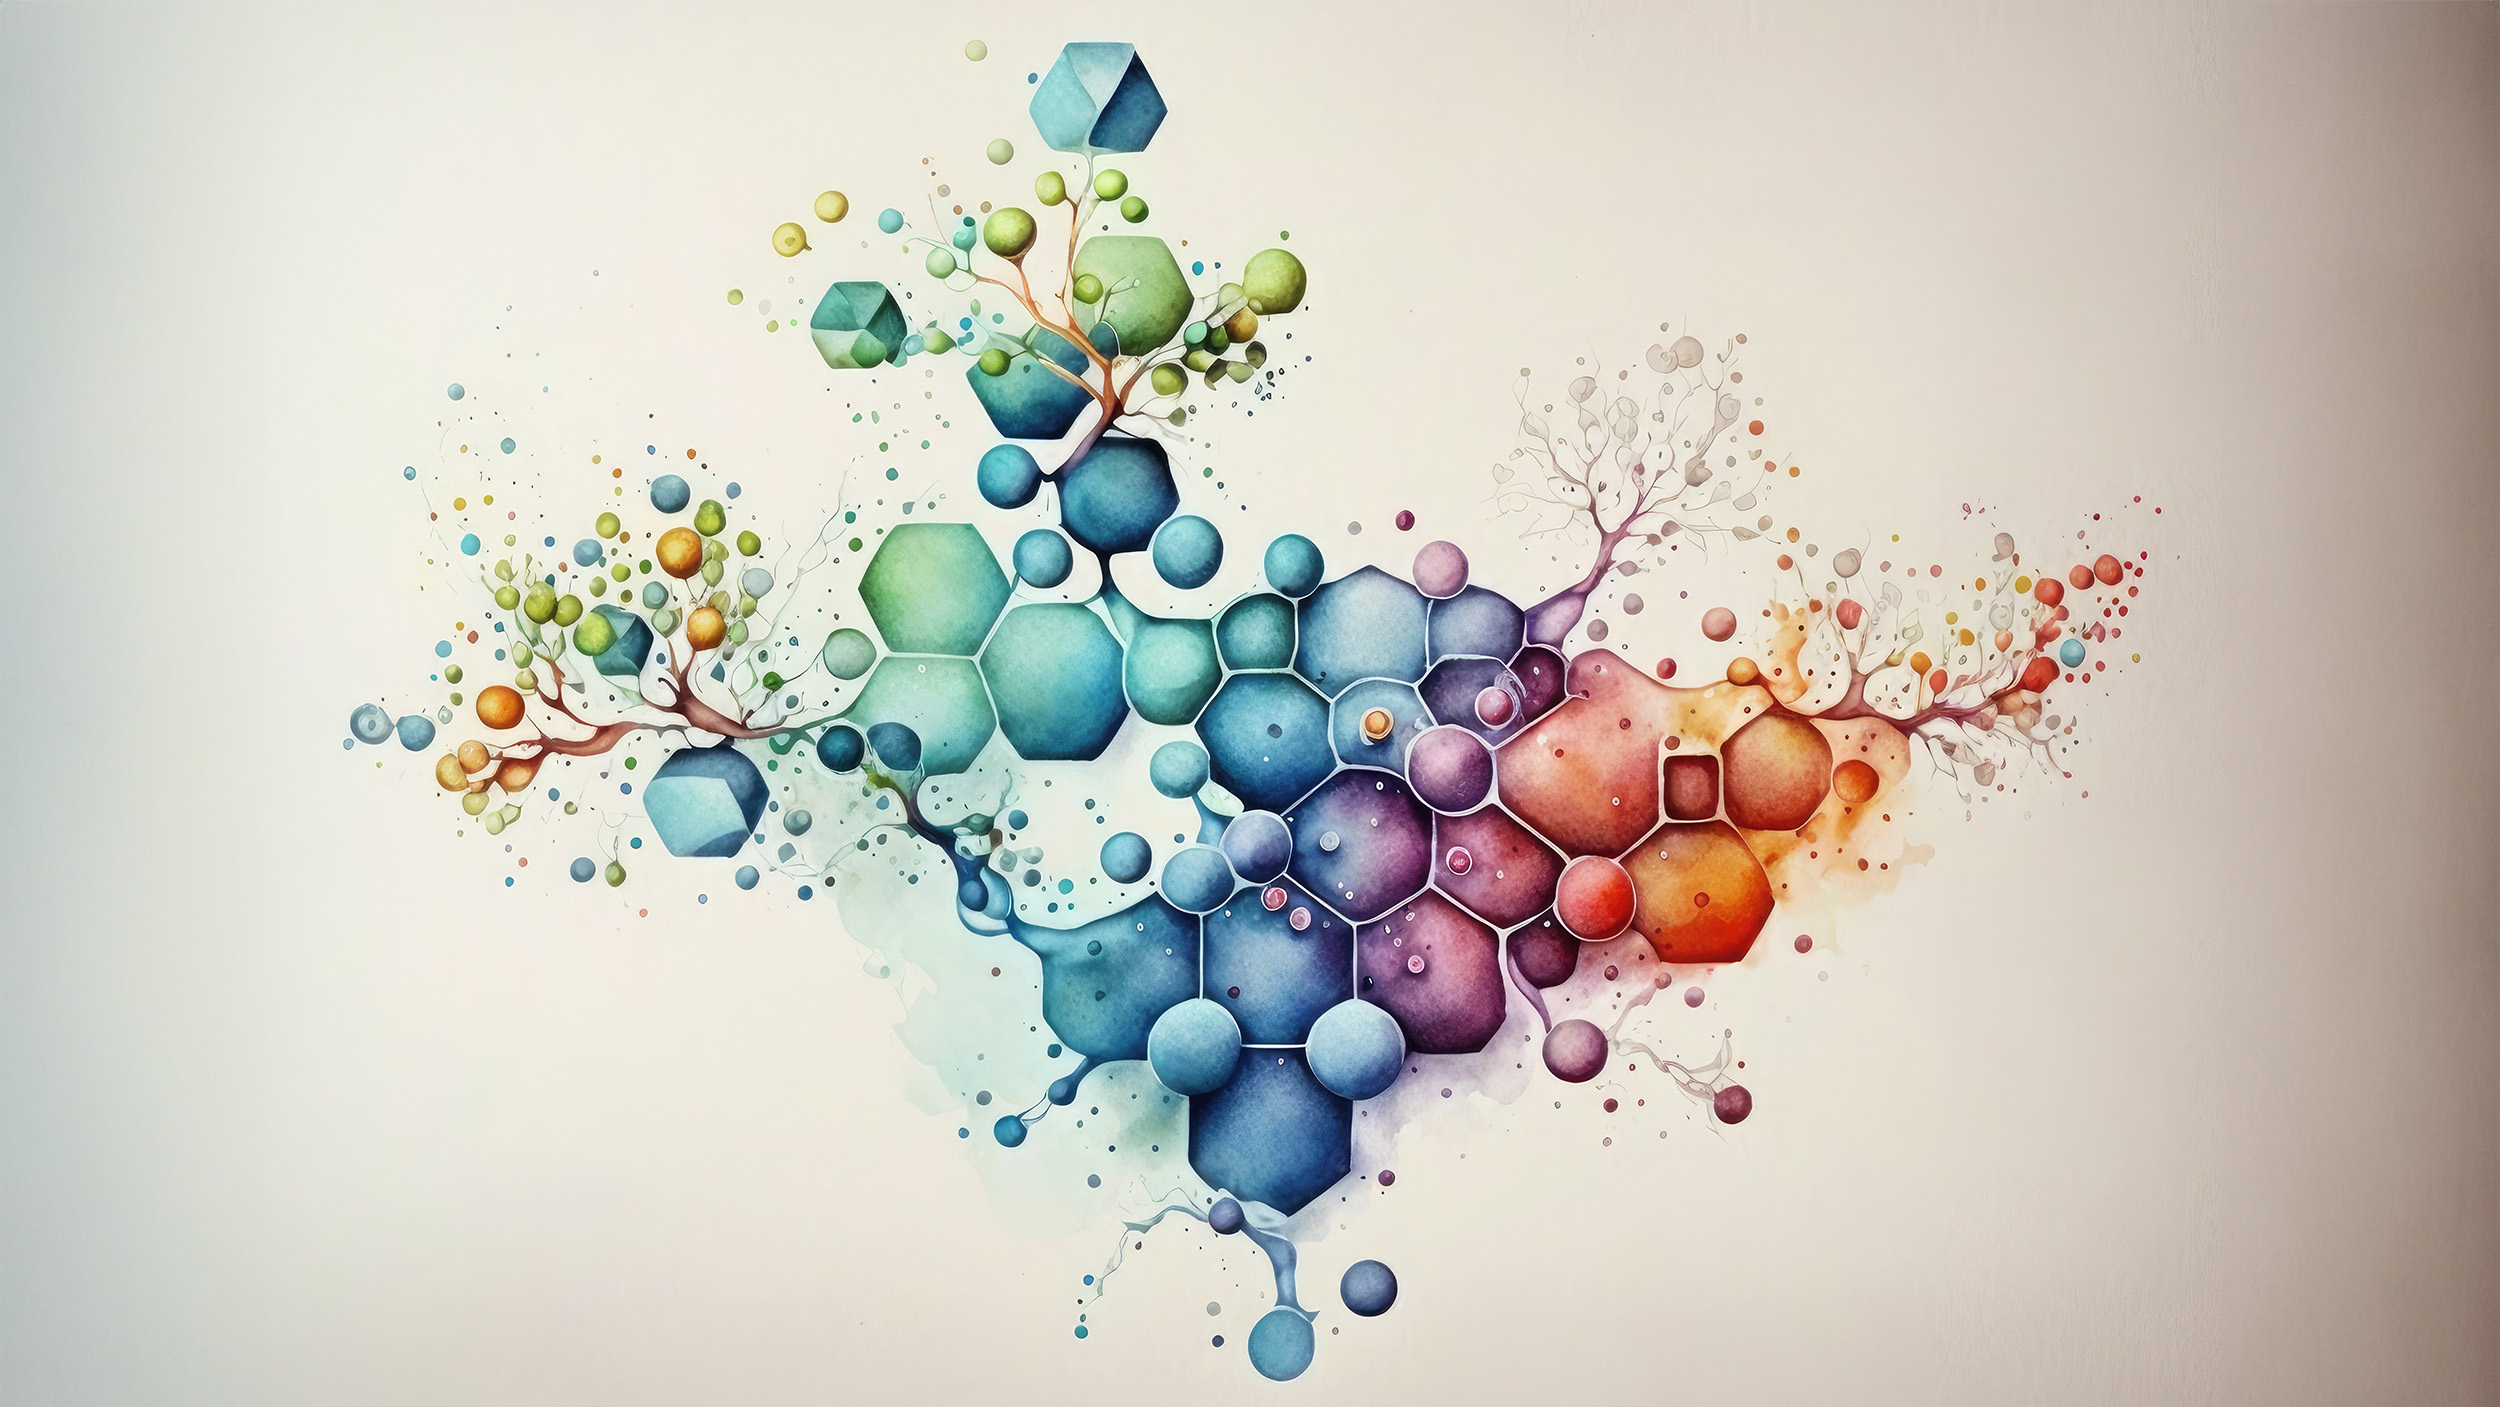 A watercolor-style illustration evoking chemistry and organic shapes.